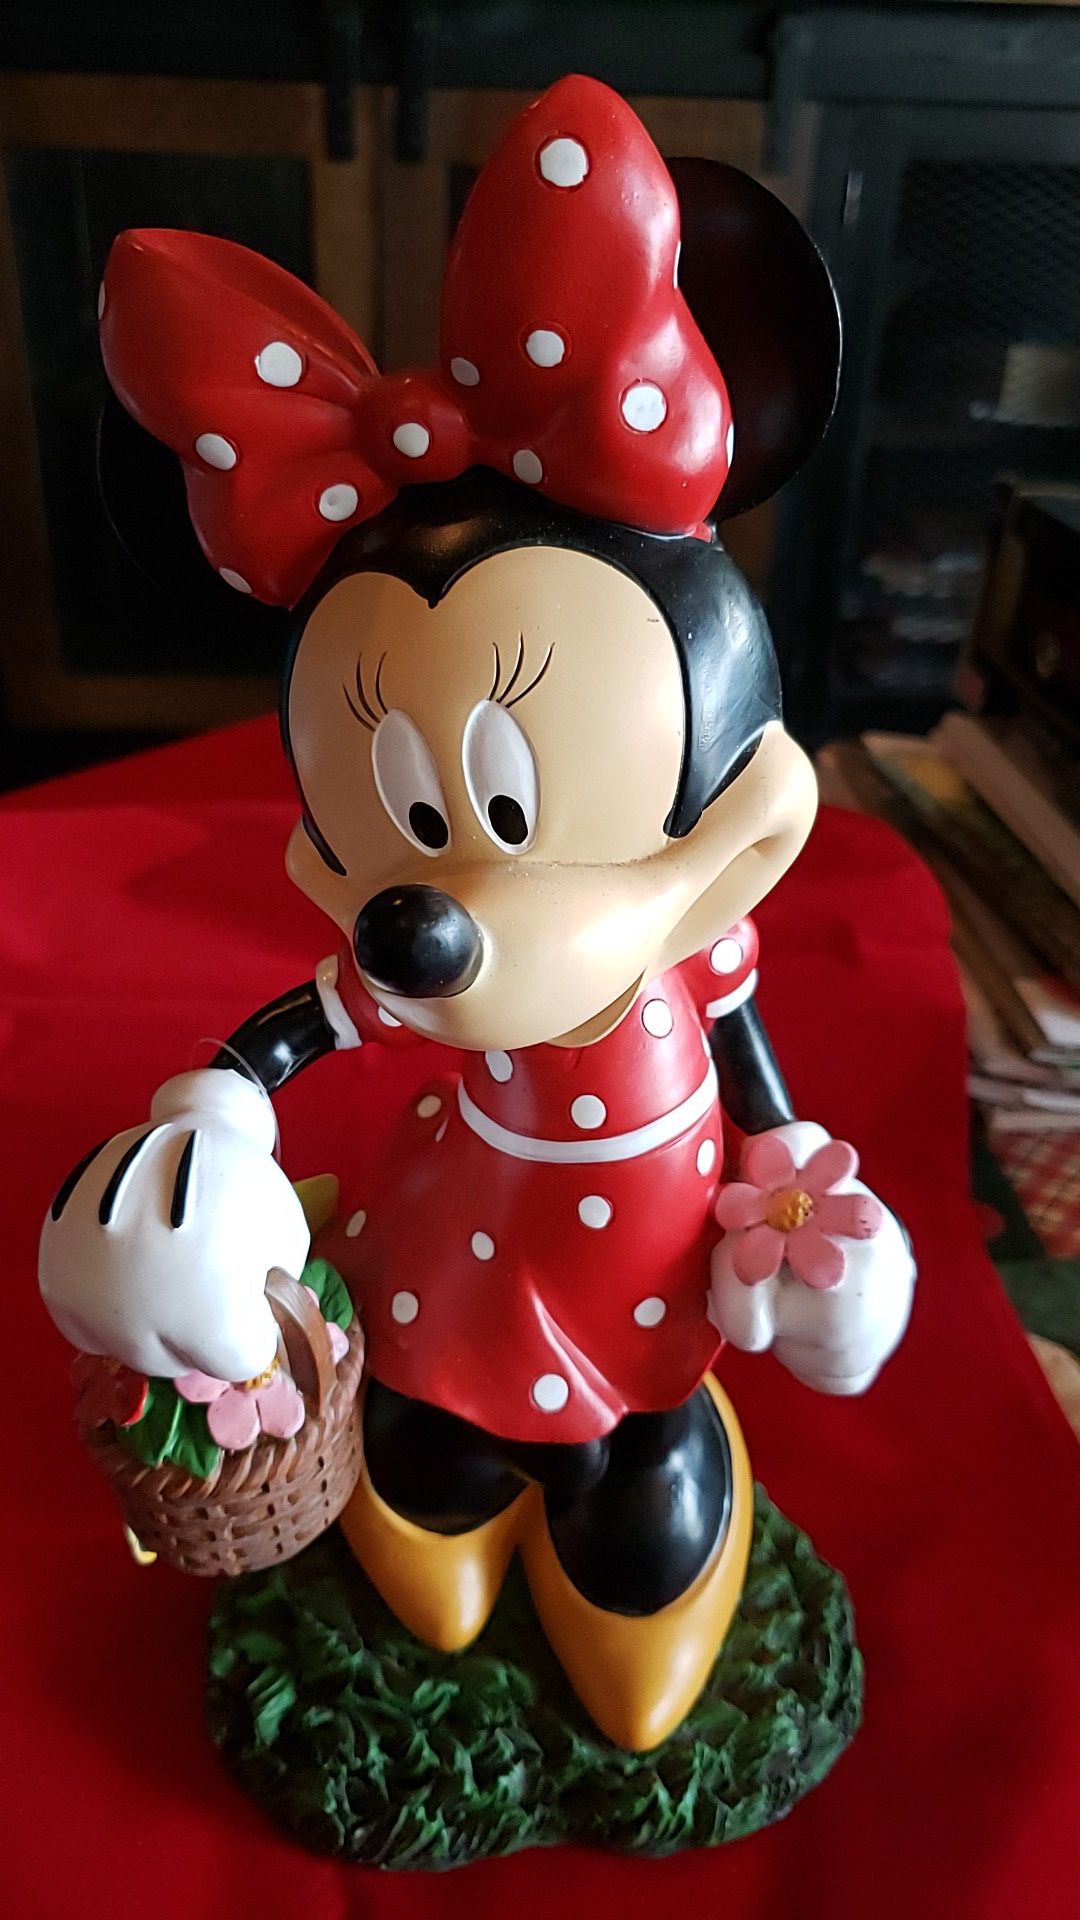 Minnie Mouse with flower basket almost 13 inches tall. Like new very cute.